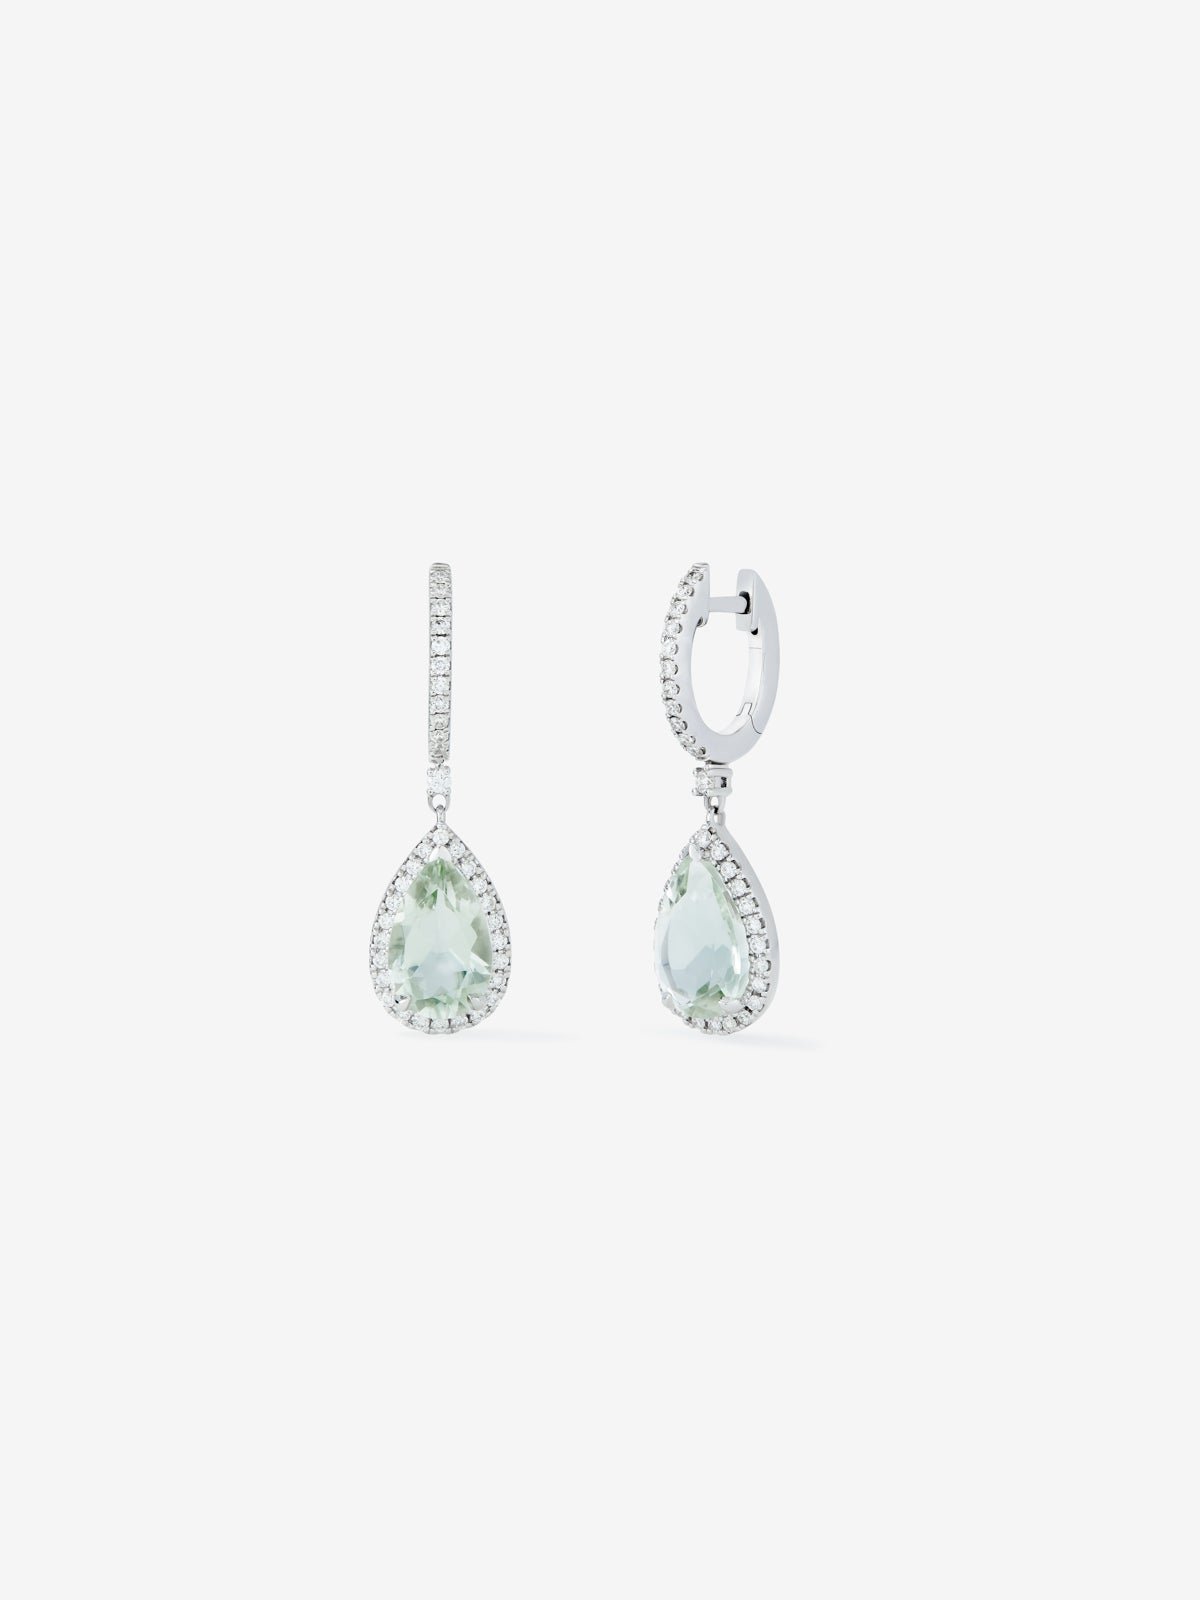 18K white gold earrings with 2 pear-cut green amethysts with a total of 3.32 cts and 72 brilliant-cut diamonds with a total of 0.4 cts